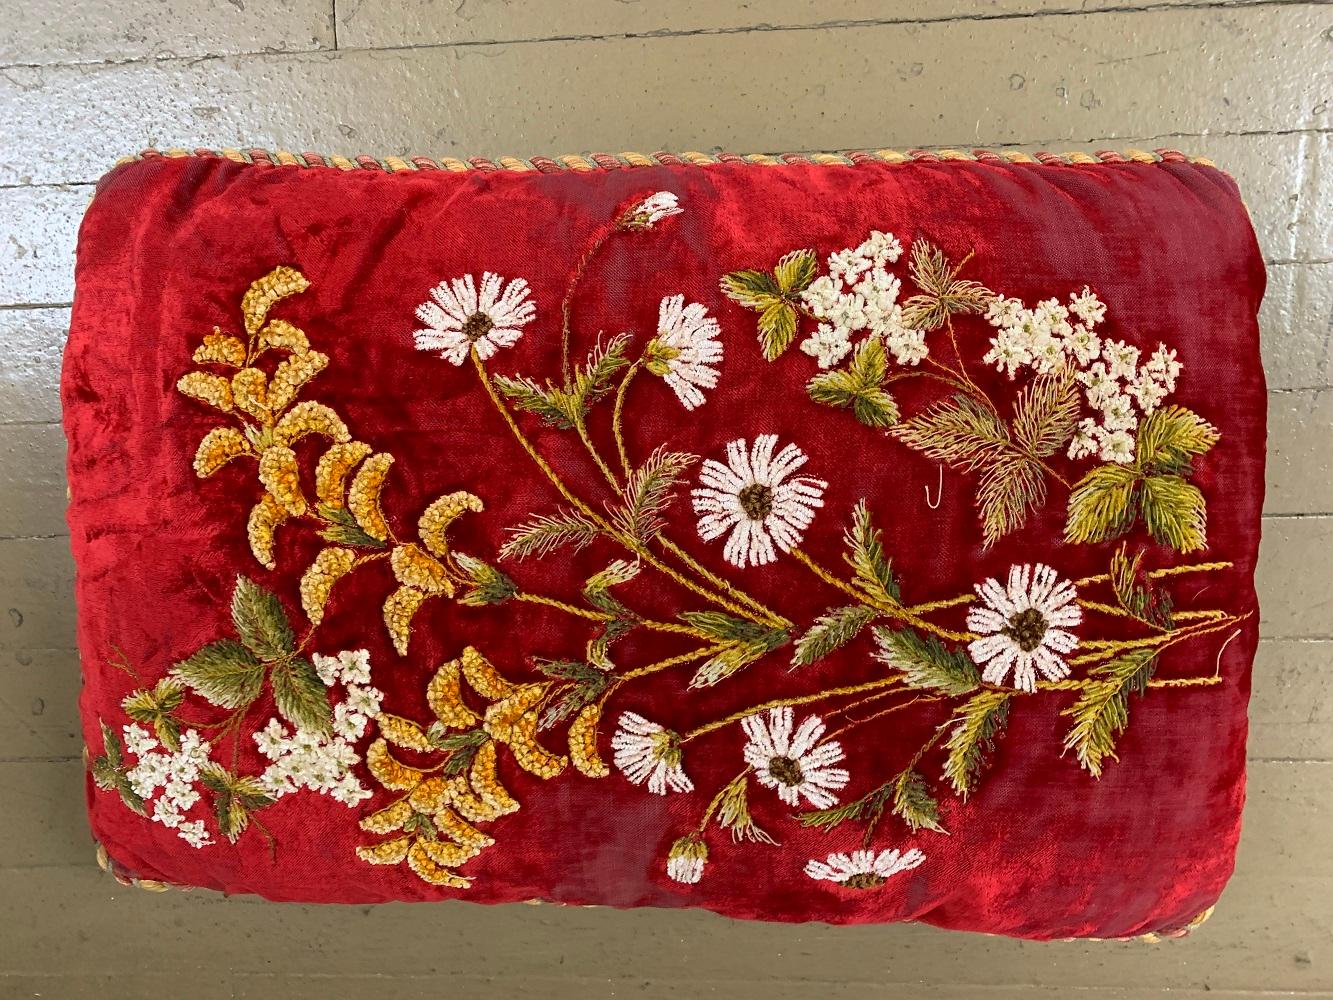 My Great- Grandmother collected these handmade Velvet pillows;
these are burgundy velvet and sage green backs; incredible stitching and embossed floral pattern. Trimmed in gold and burgundy

exceptional and elegant.